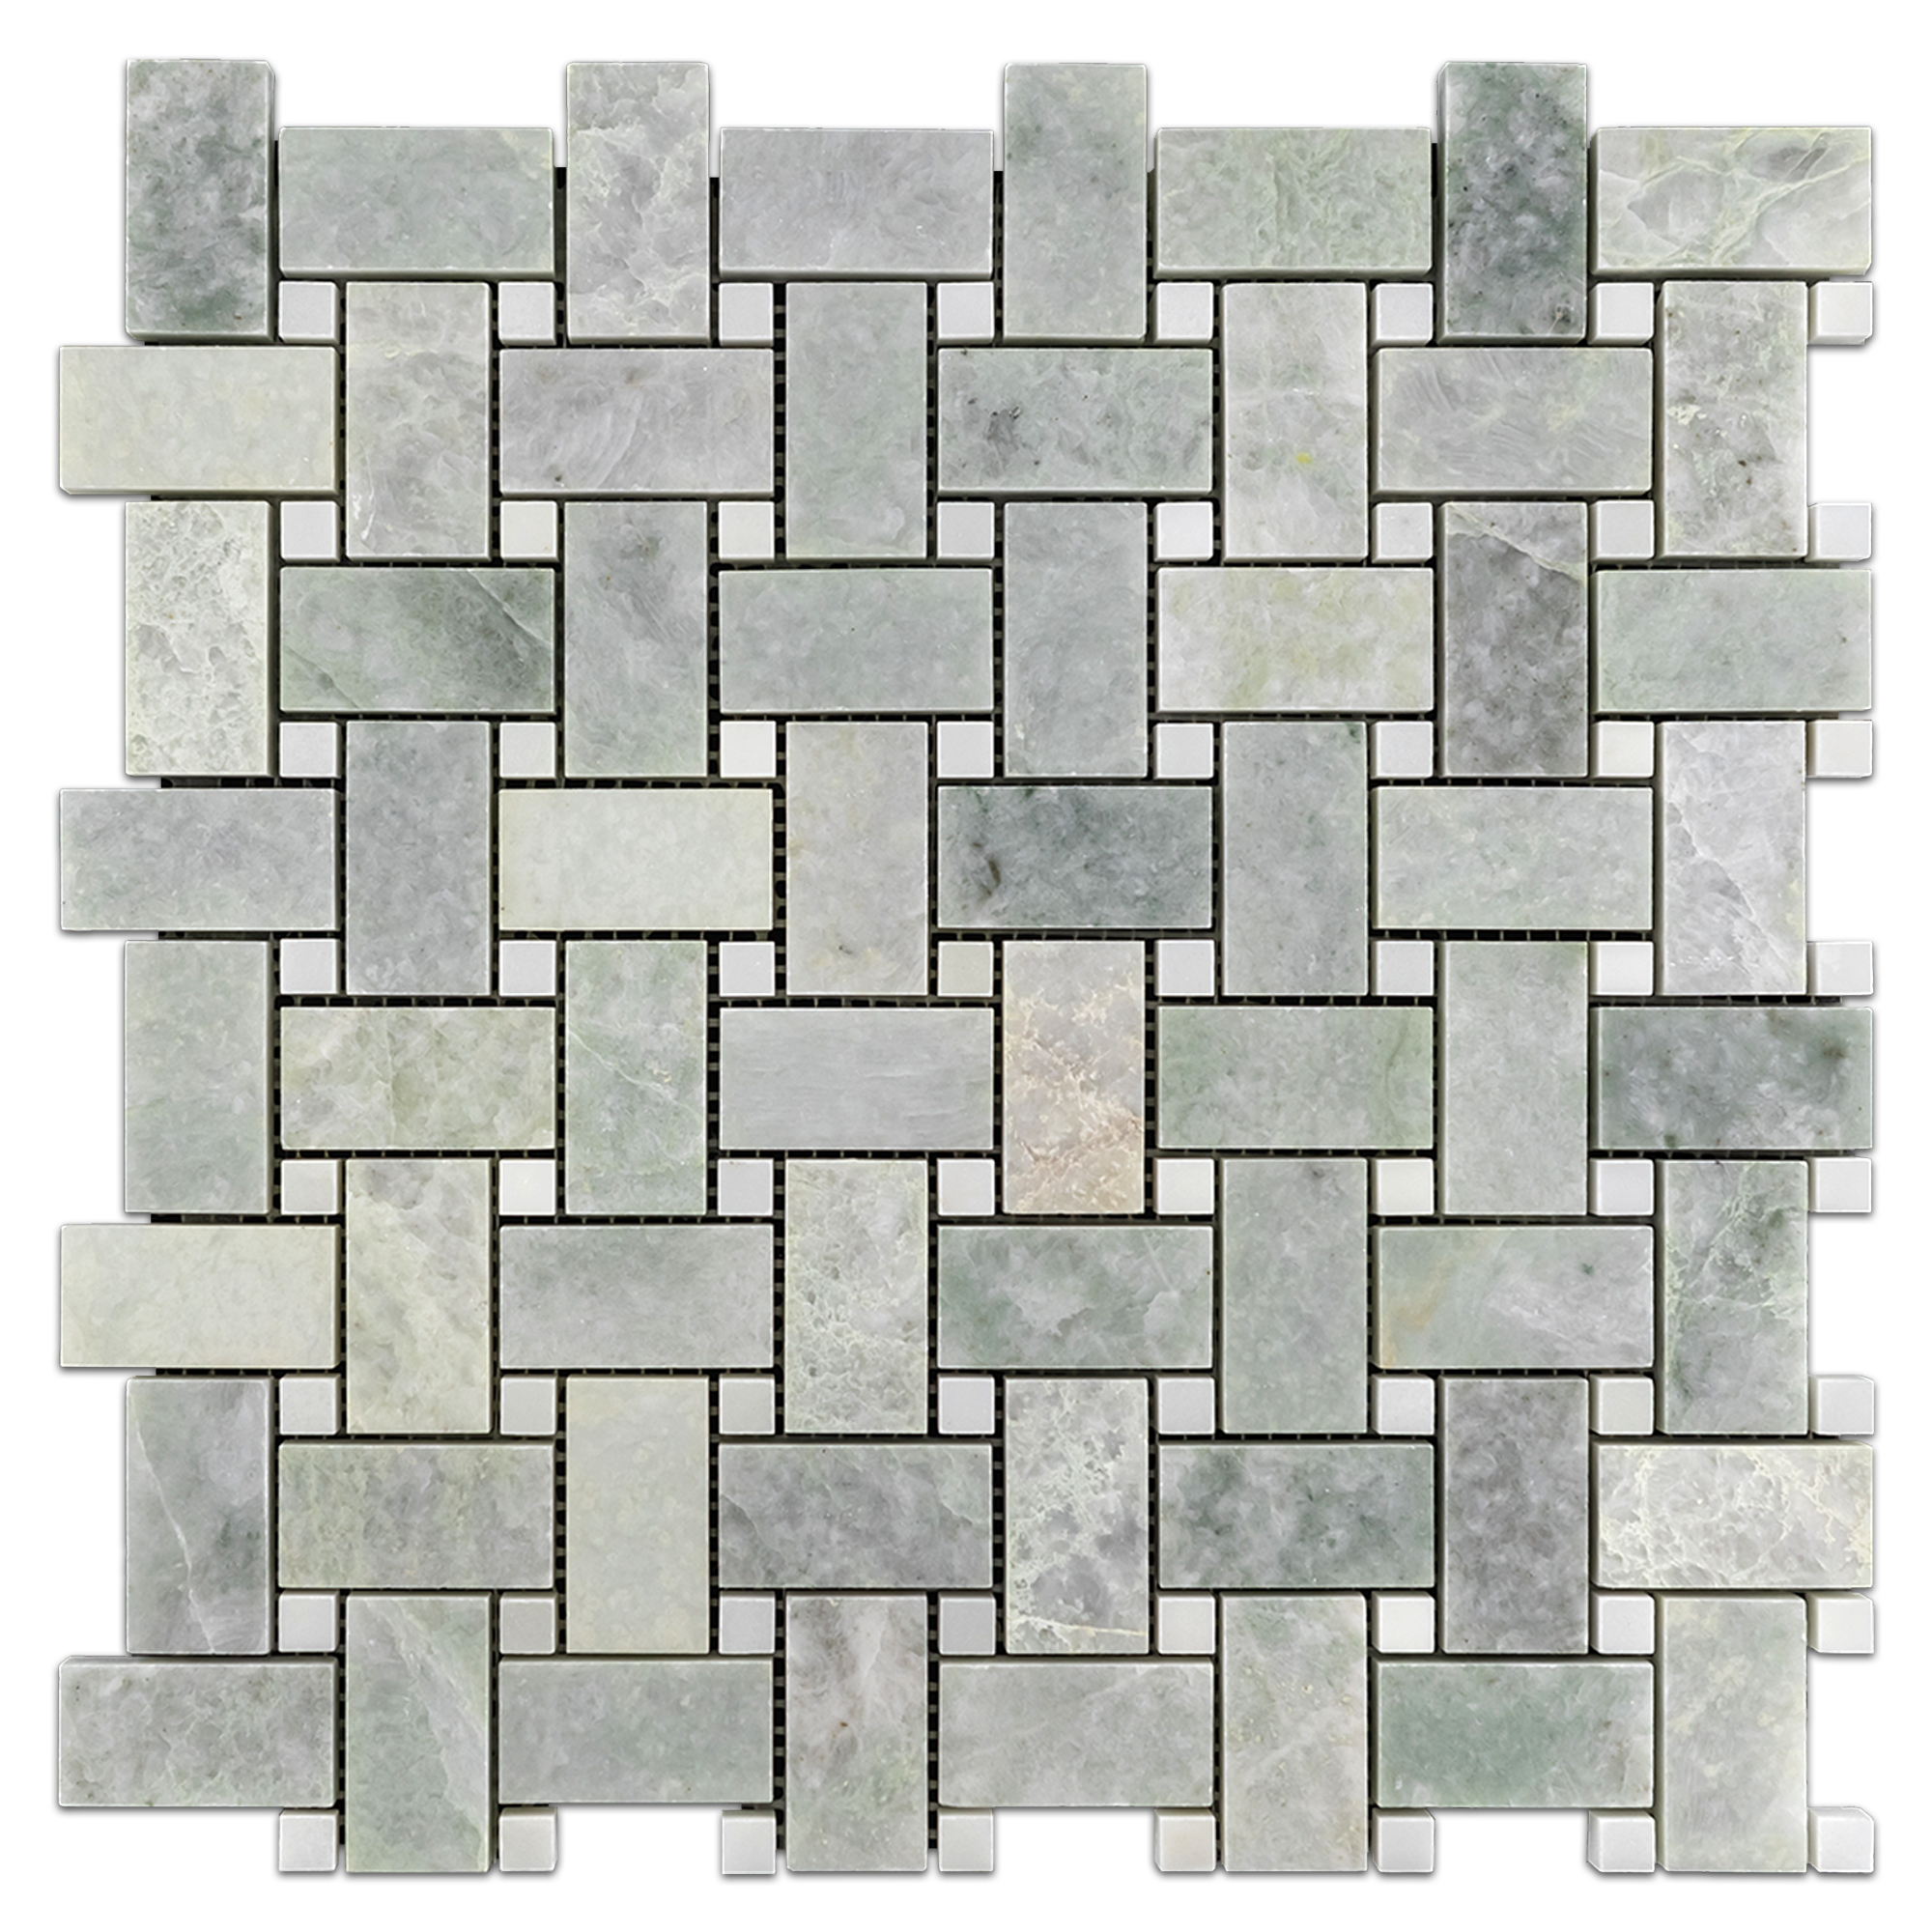 Elon Ming Green Absolute White Marble Stone Blend Basketweave Field Mosaic 12x12x0.375 Honed - Surface Group International Product